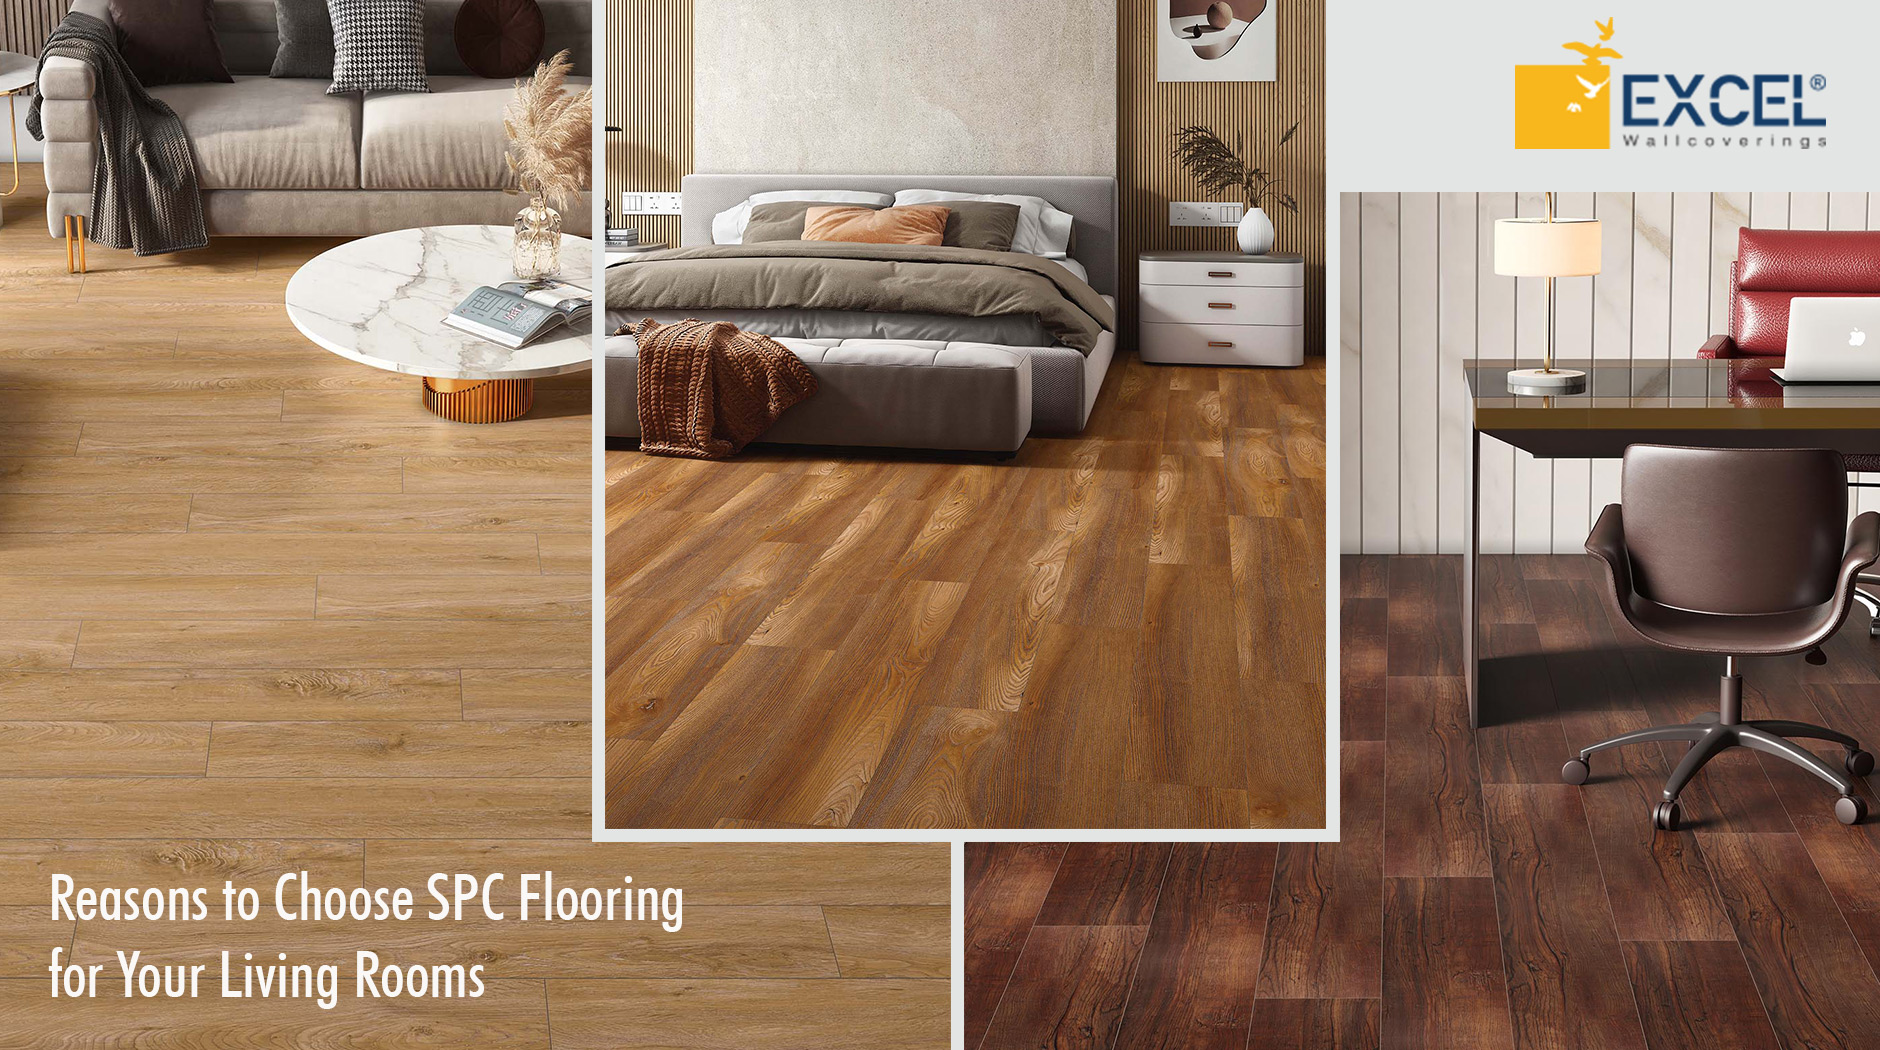 Reasons to Choose SPC Flooring for Your Living Rooms